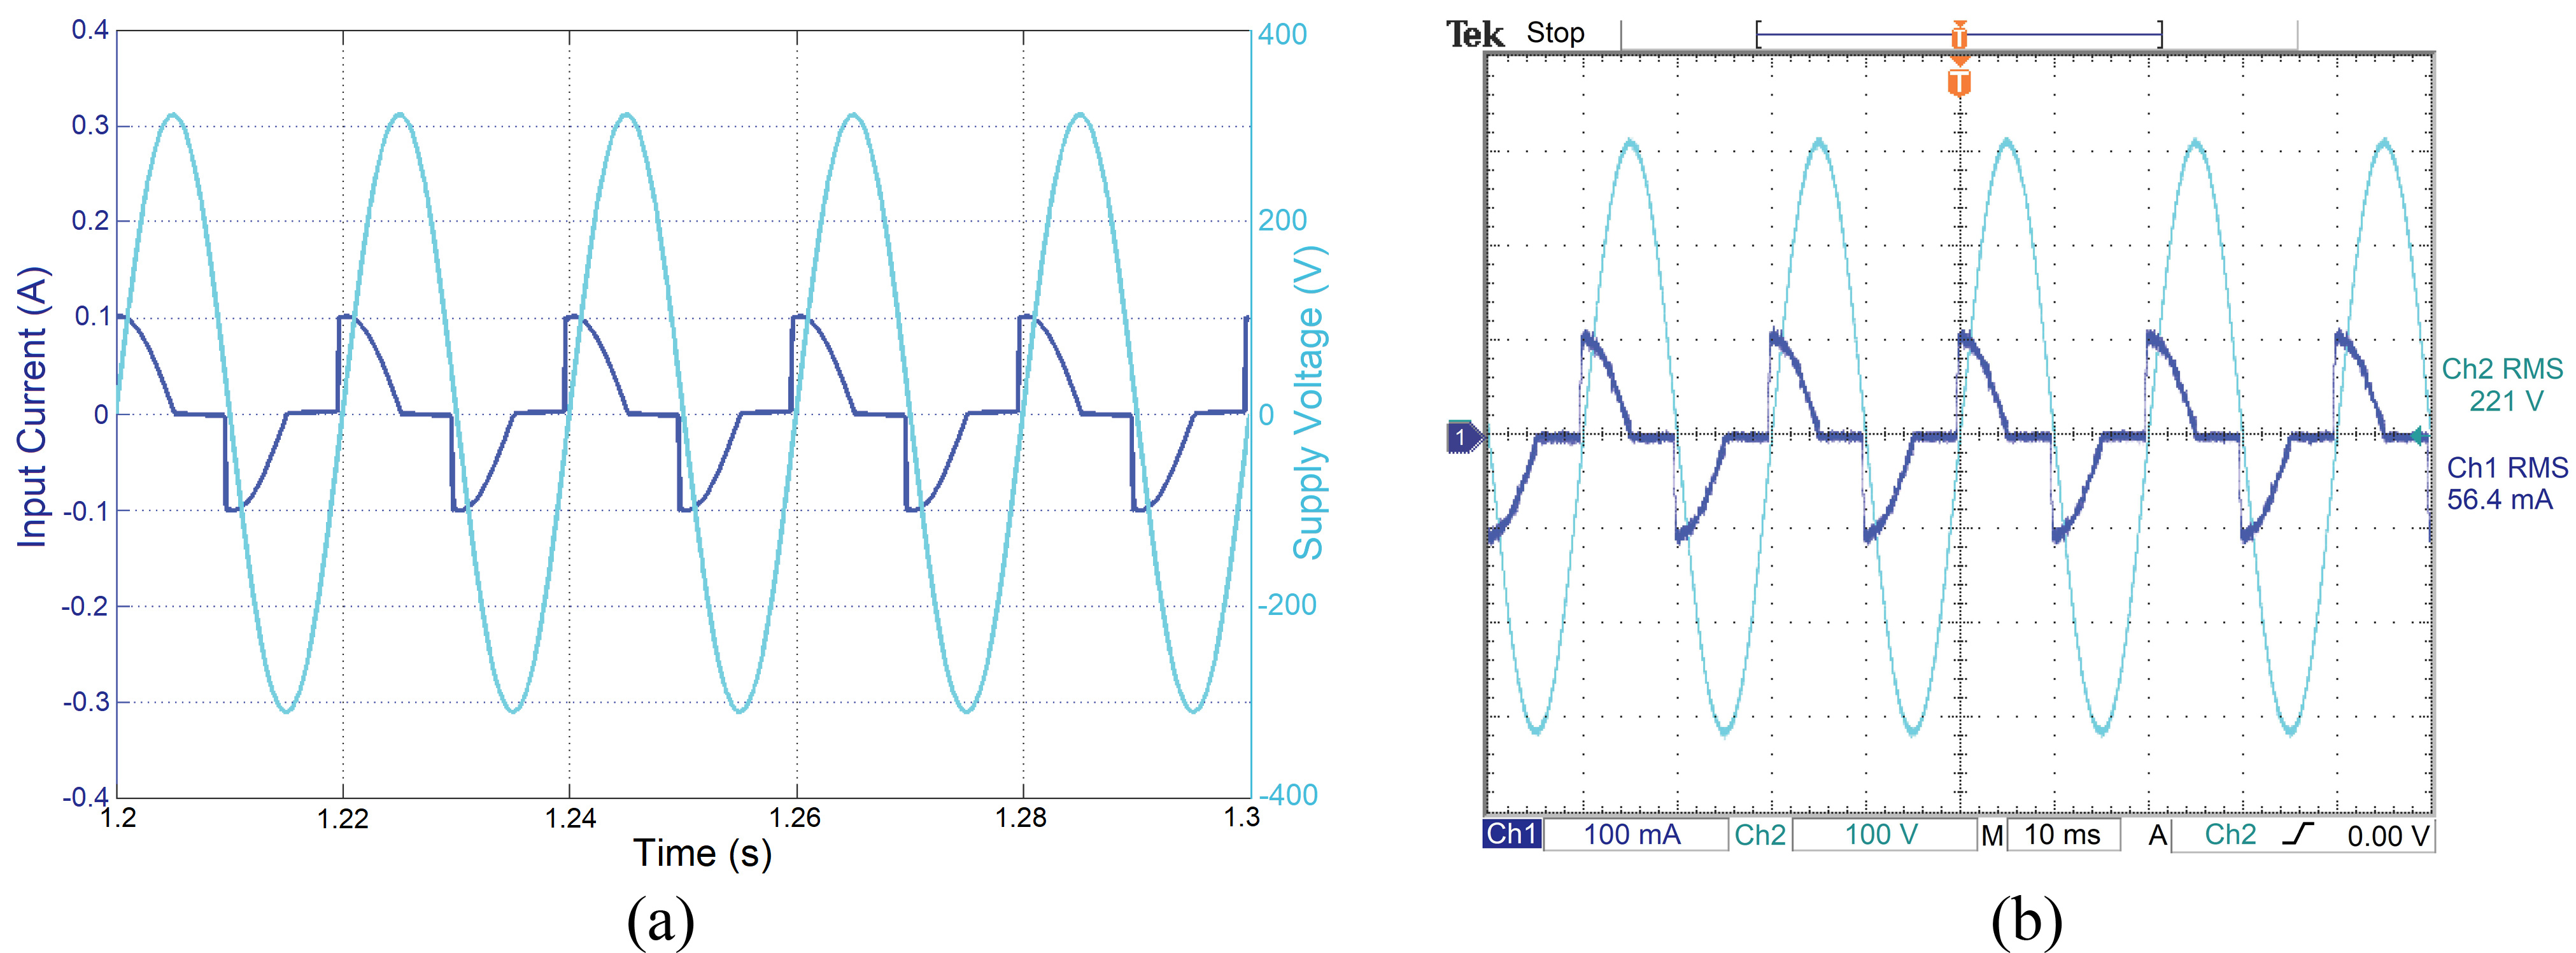 Voltage and current (a) simulation test and (b) experimental test.